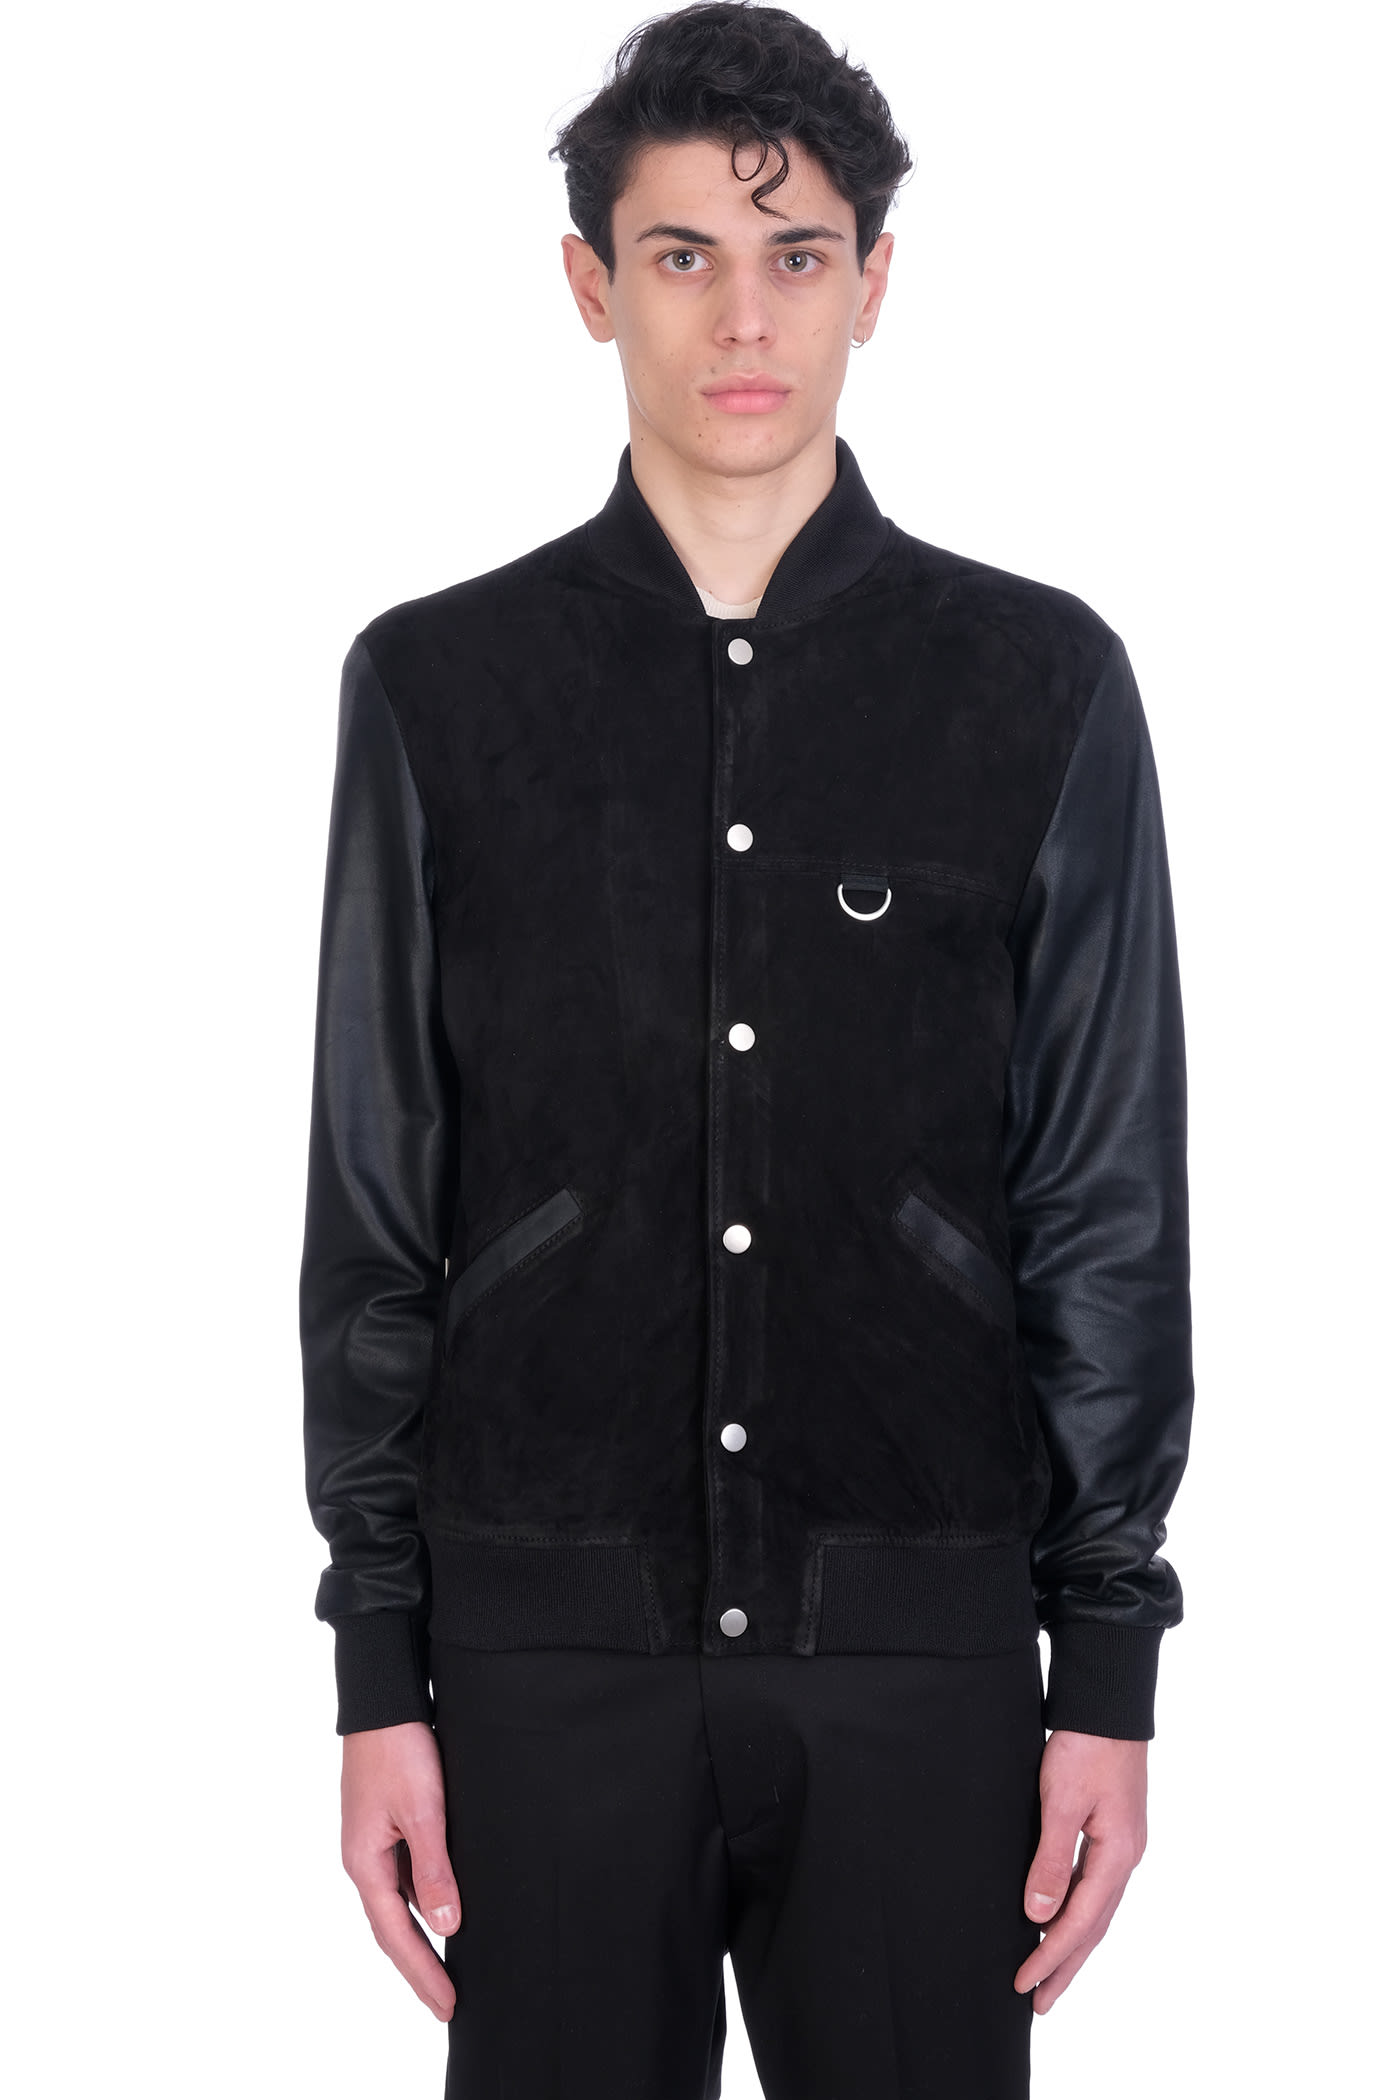 Low Brand Bomber In Black Suede And Leather